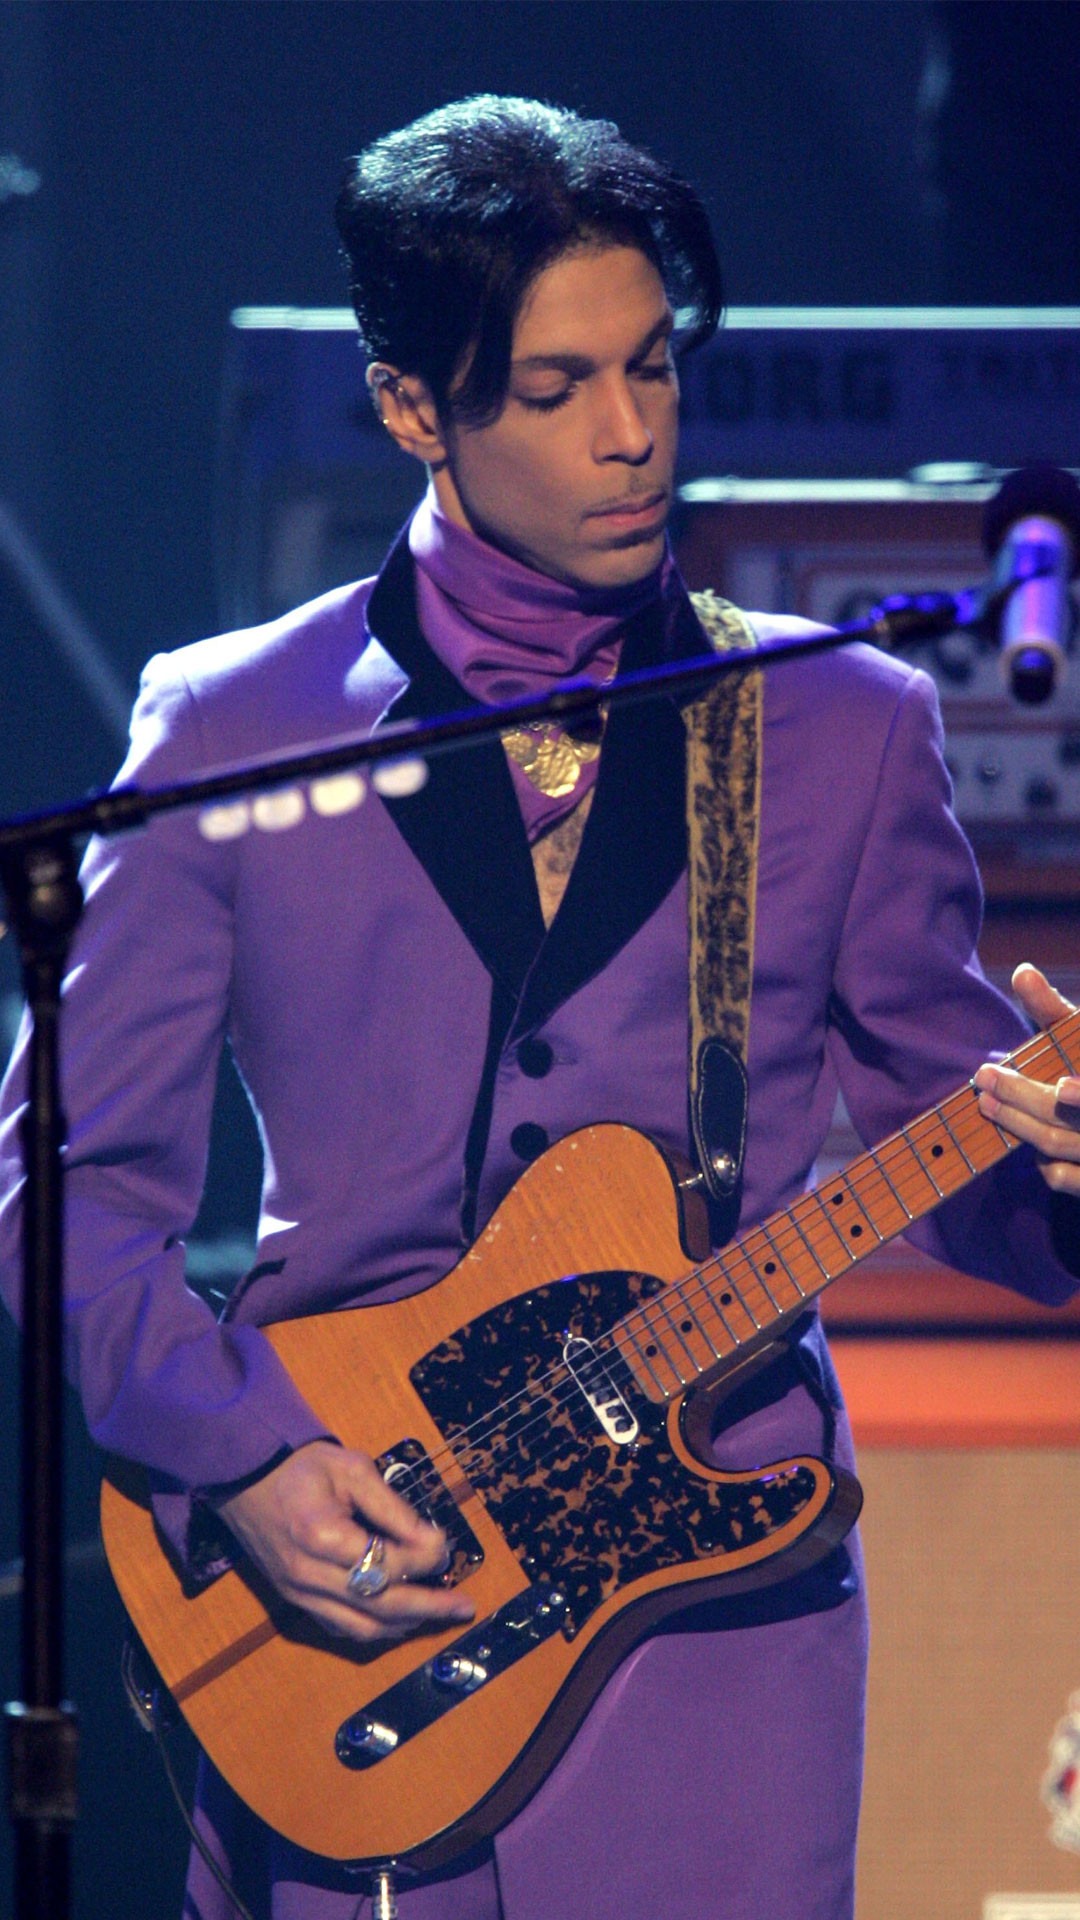 Prince's Death Case Closed, No Criminal Charges to Be Filed | E! News